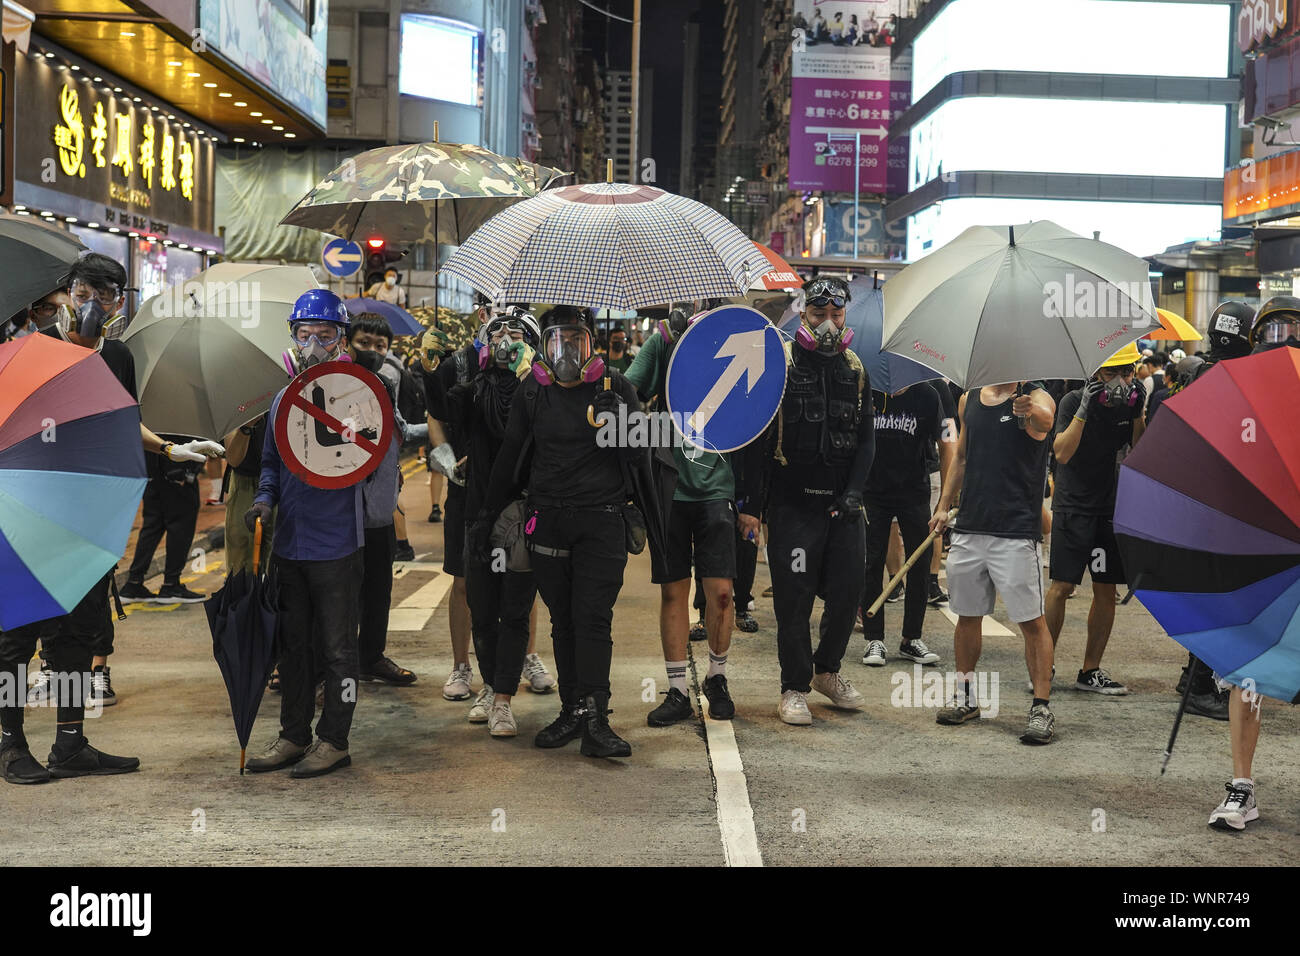 Kowloon, Hong Kong. 6th Sep, 2019. Protesters filled Nathan Rd as they confront police force on Friday September 6, 2019.in Mong Kok Town Kowloon, Hong Kong.Thousands of protestors gathered outside of Mong Kok police station and around that area to protest the police violence against citizens of Hong Kong.Protesters Moved Nathan Rd to south, destroying surveillance cameras, street signs, building barricades with wooden panes and garbages then set on fire as they move on.9/6/2019.Kowloon, Hong Kong. Credit: ZUMA Press, Inc./Alamy Live News Stock Photo